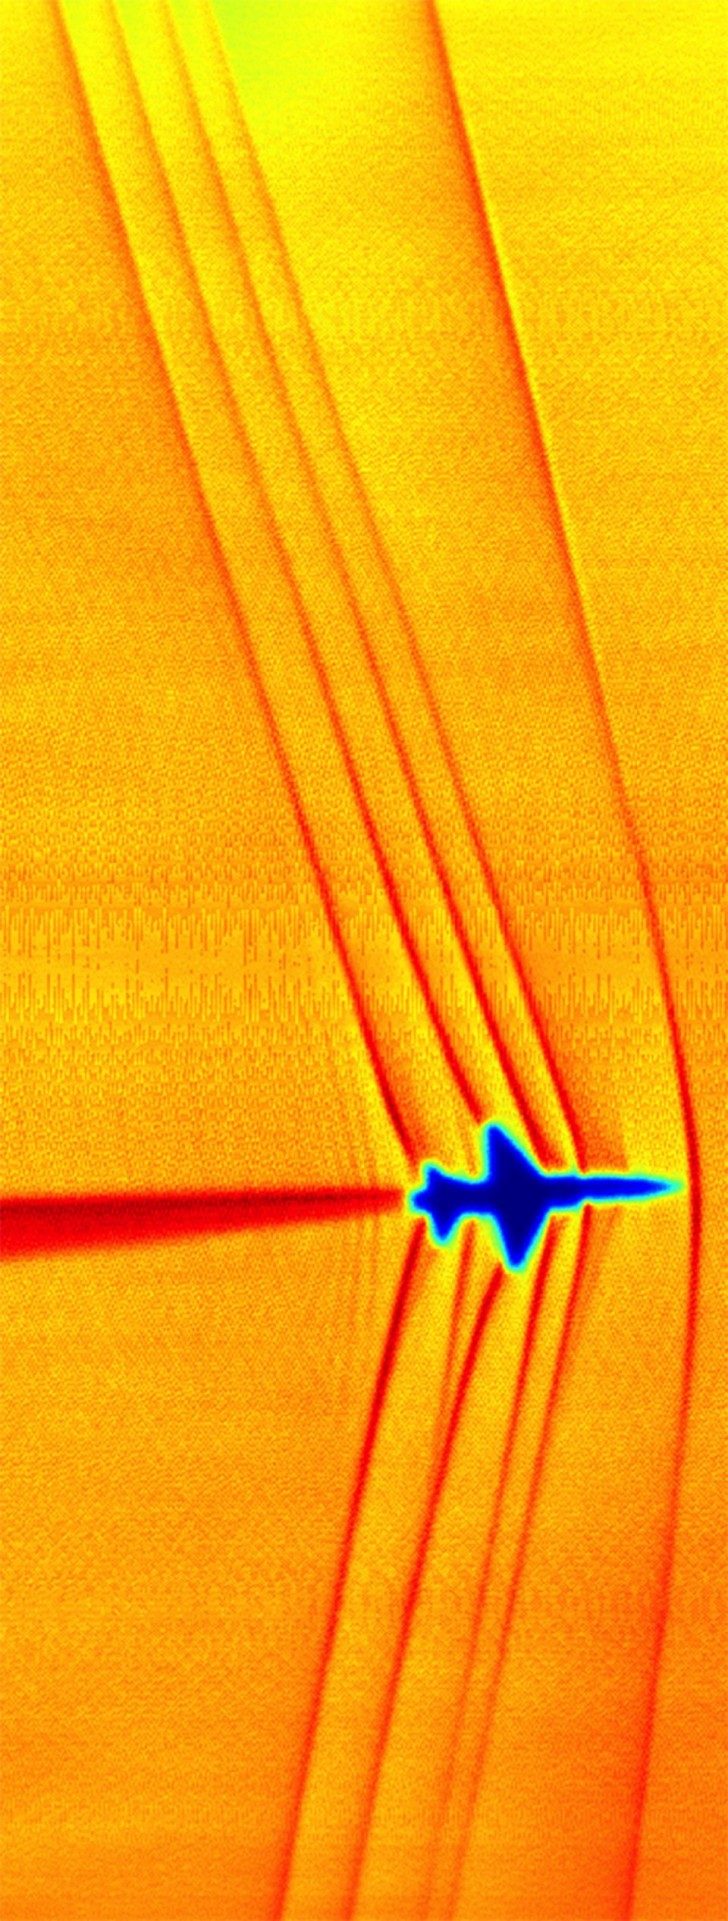 stunning-nasa-images-of-shock-waves-created-by-jets-as-they-break-the-sound-barrier-27489-960x2533